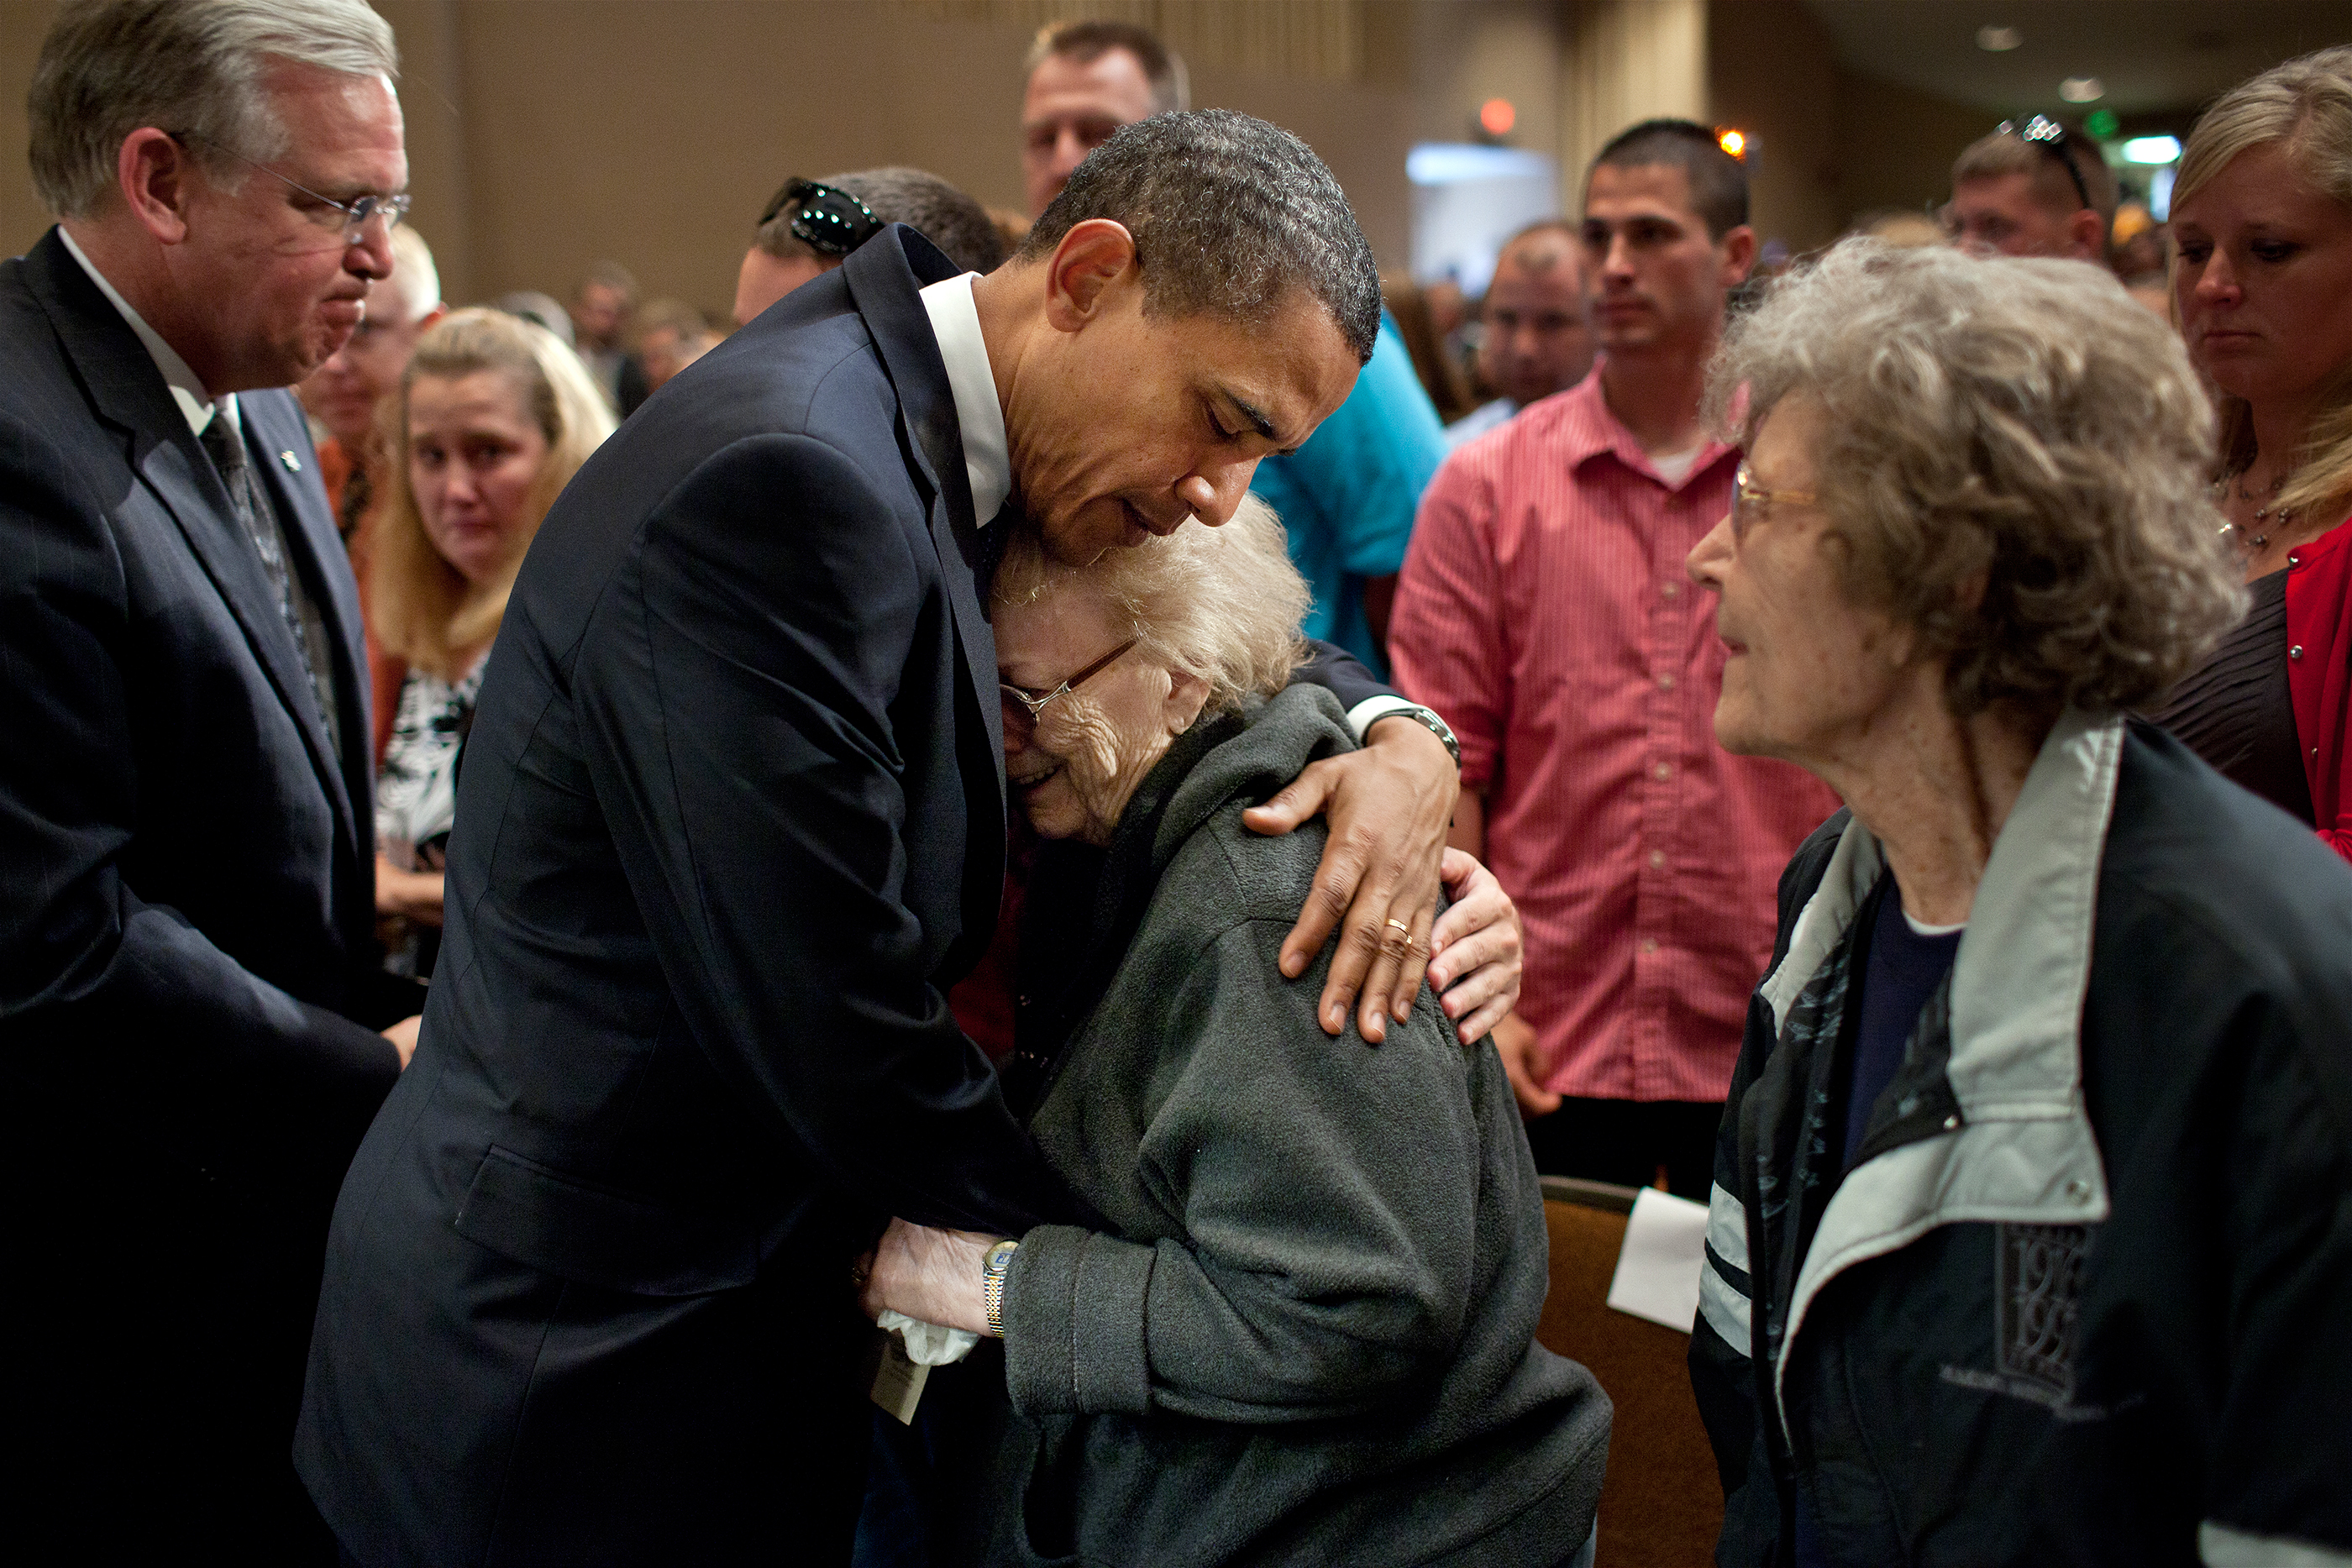 Missouri, May 29, 2011. Consoling families affected by the deadly tornadoes in Joplin. (Official White House Photo by Pete Souza)